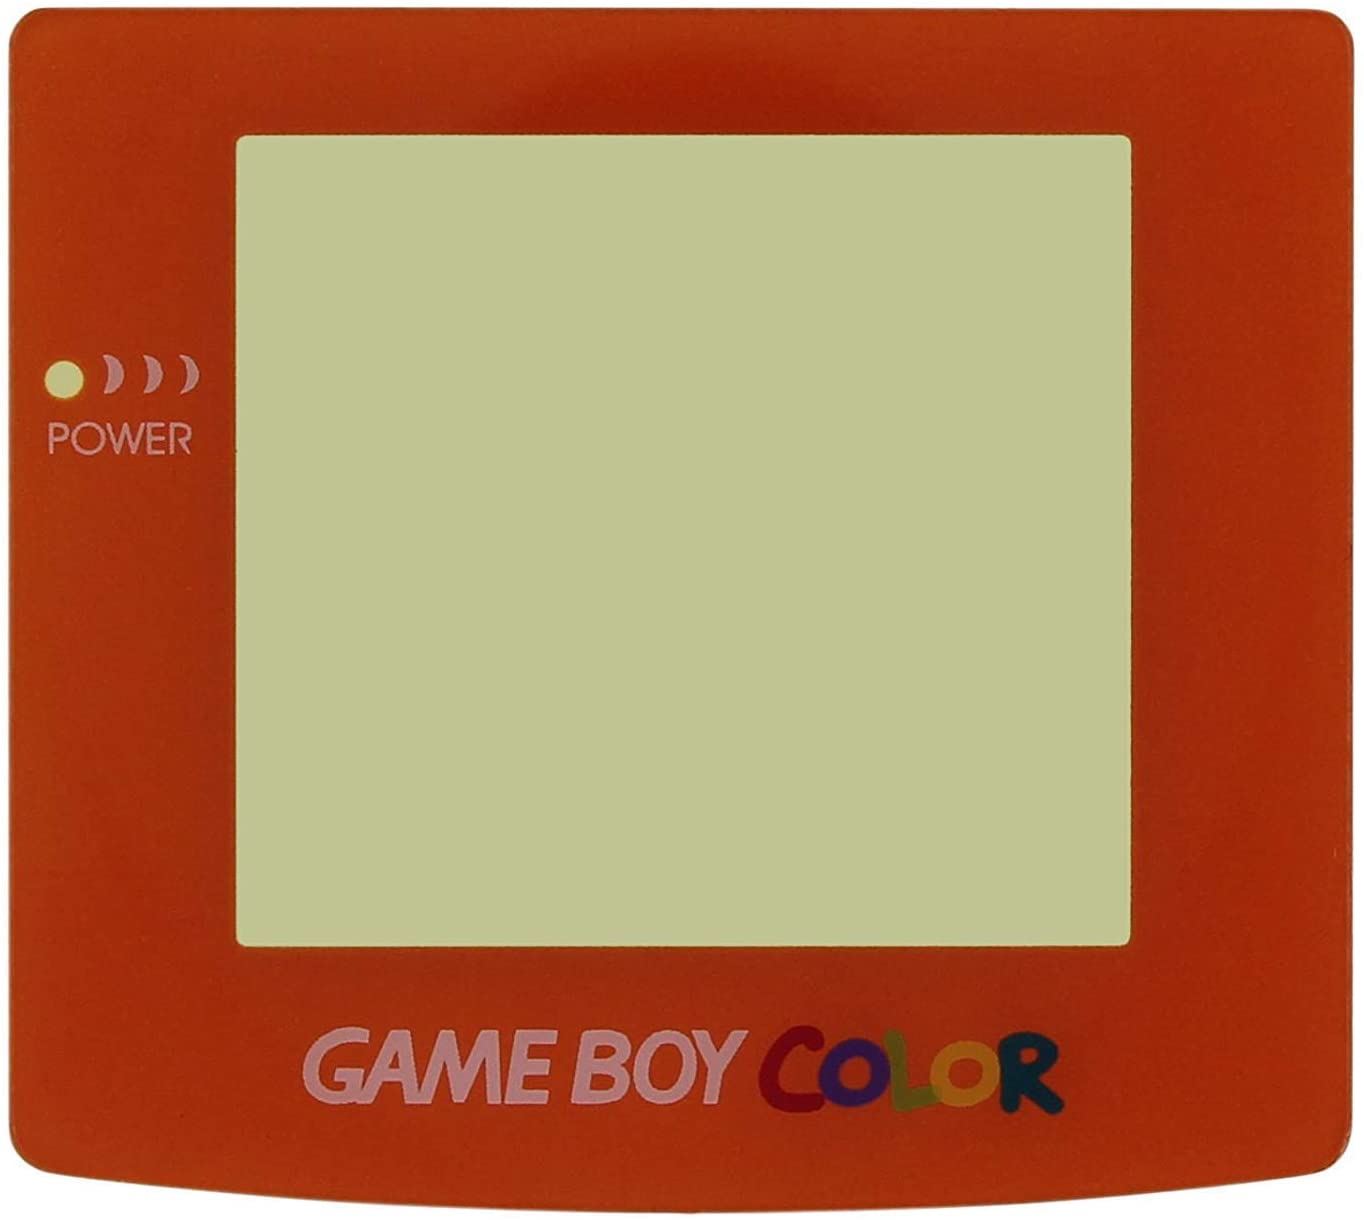 for GBC Gameboy Color - Replacement Front Screen Cover Lens (9 Colours) | FPC